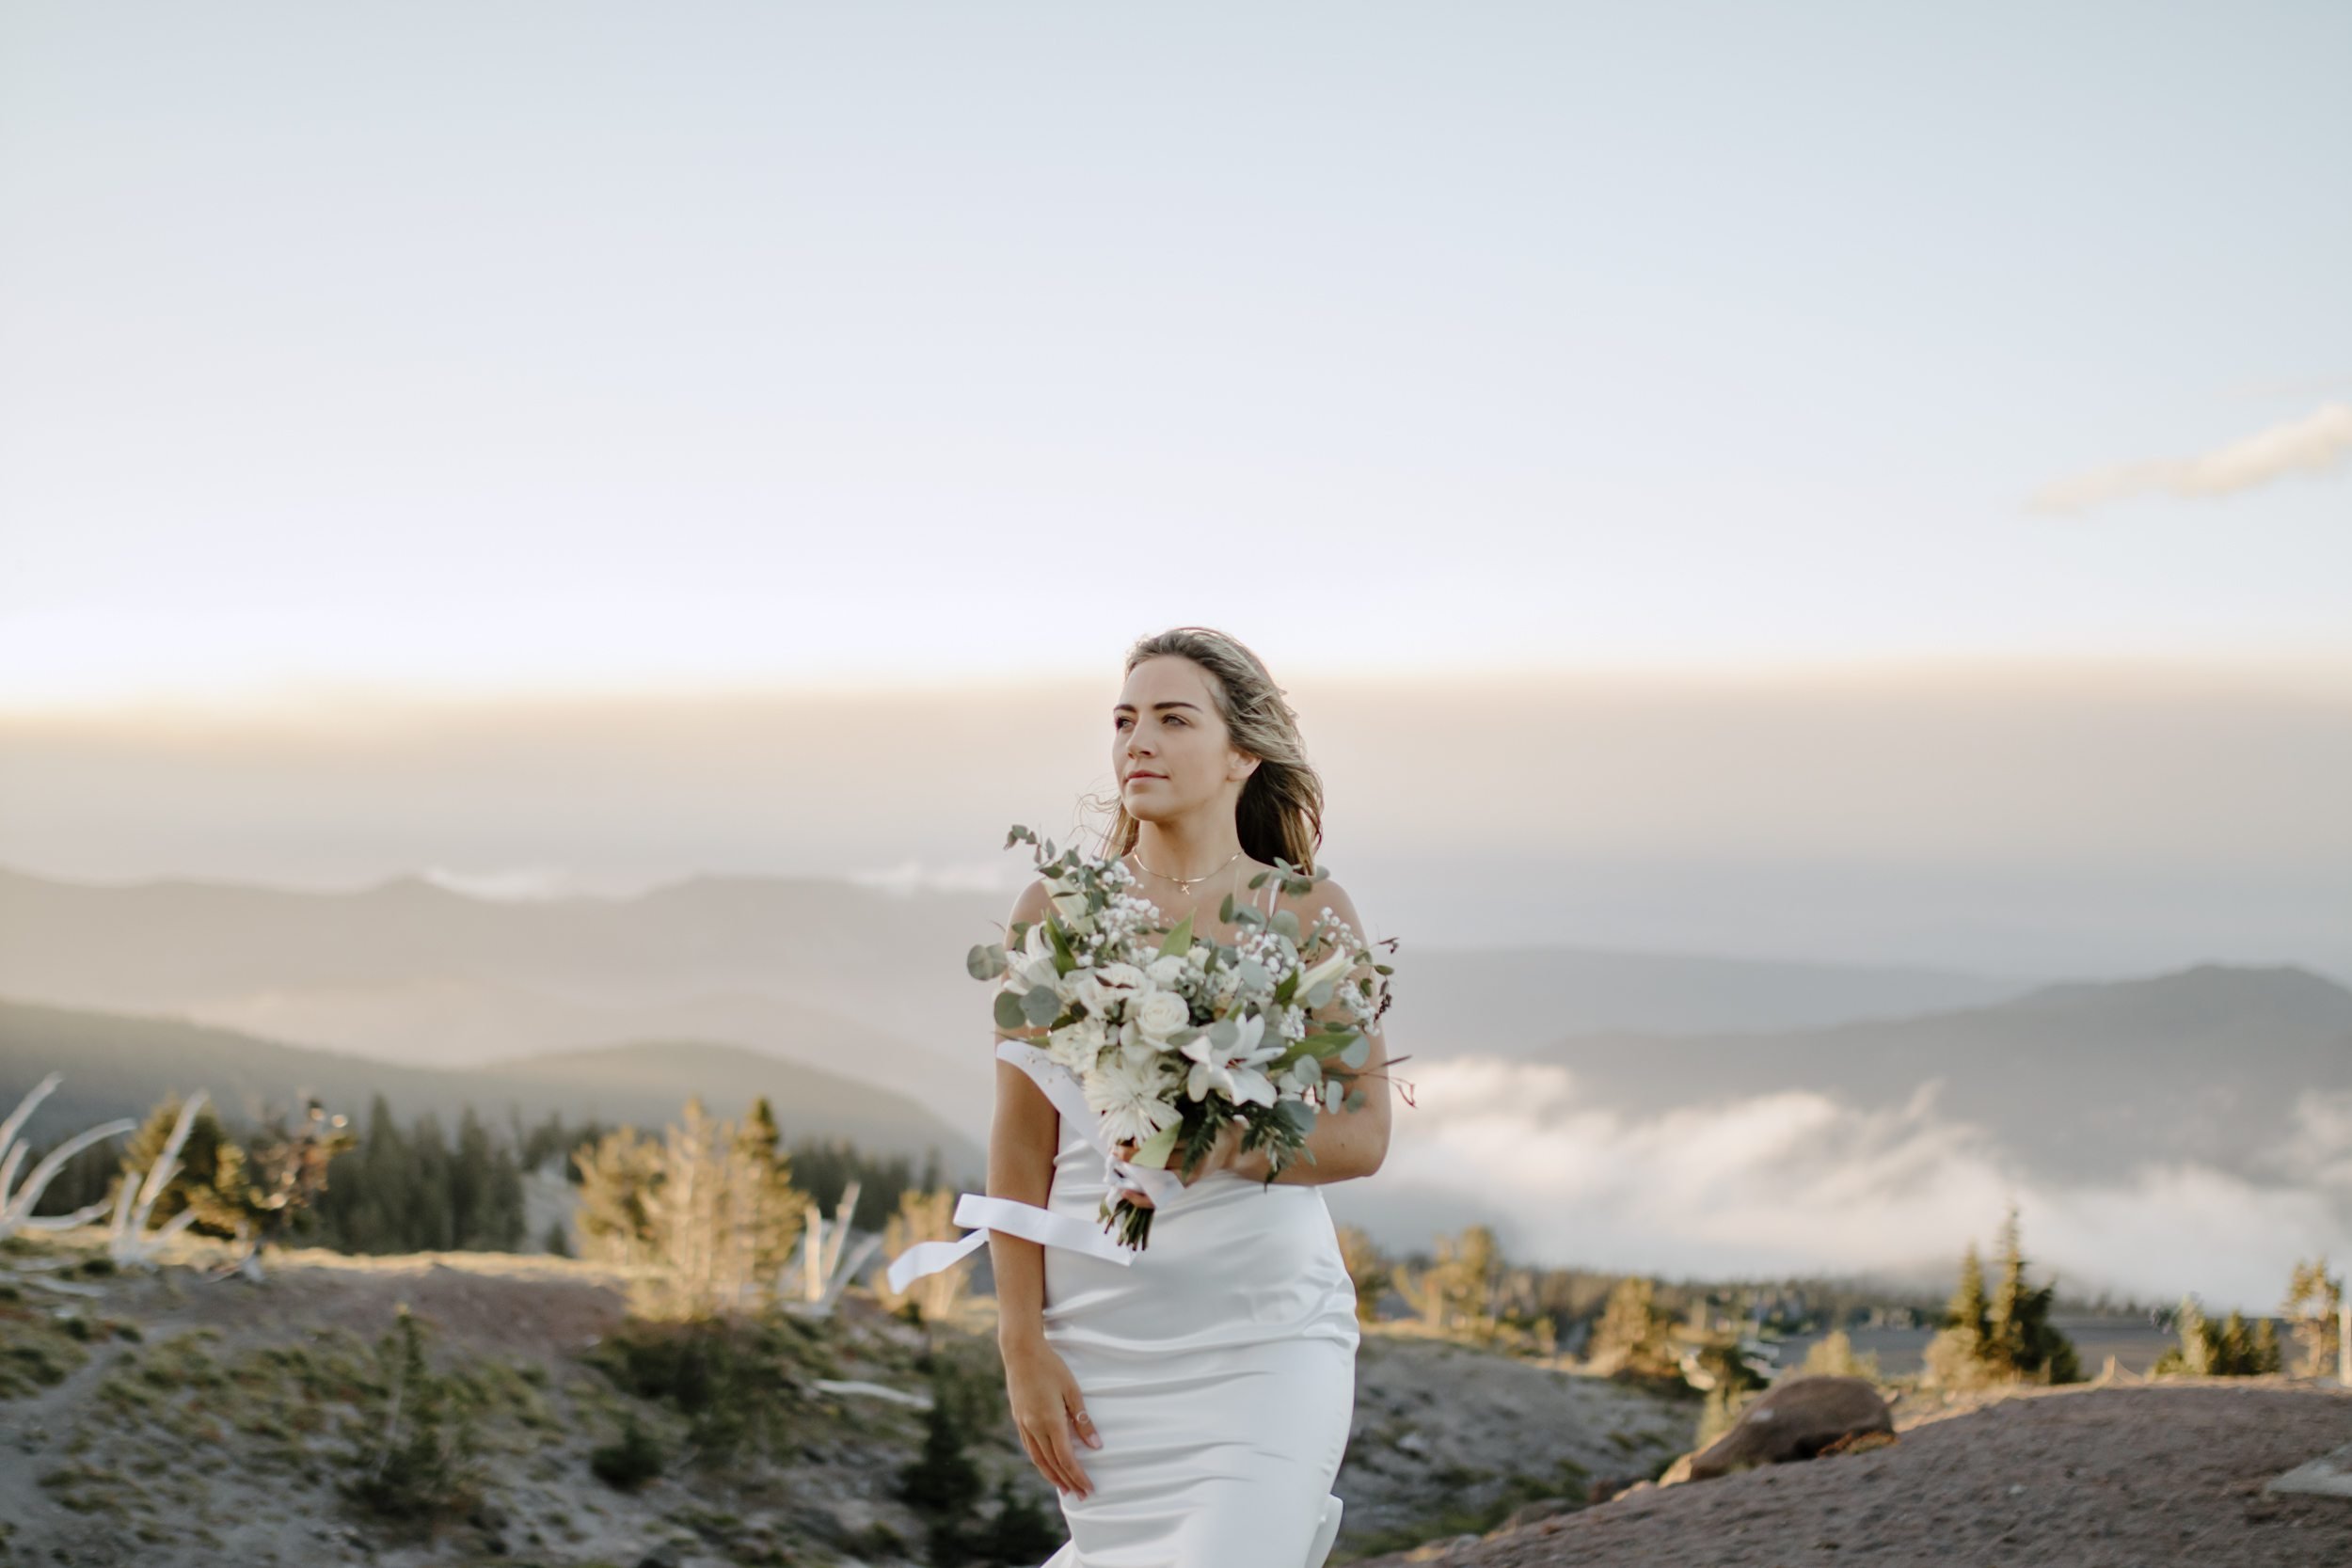 woman posing on mountain for elopement photoshoot, destination elopement photography